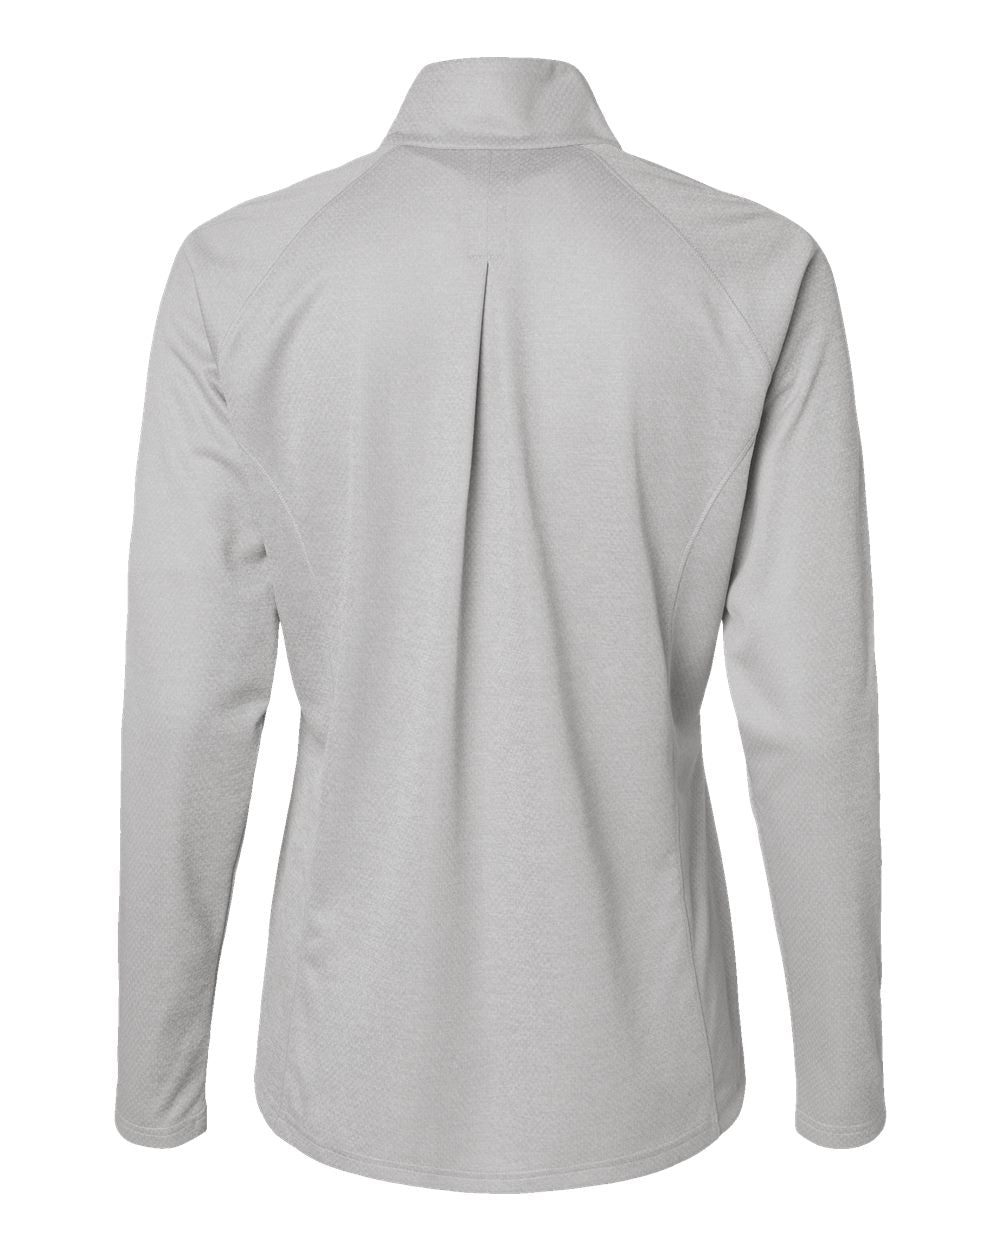 Adidas A594 Women's Space Dyed Quarter-Zip Pullover #color_Grey One Heather